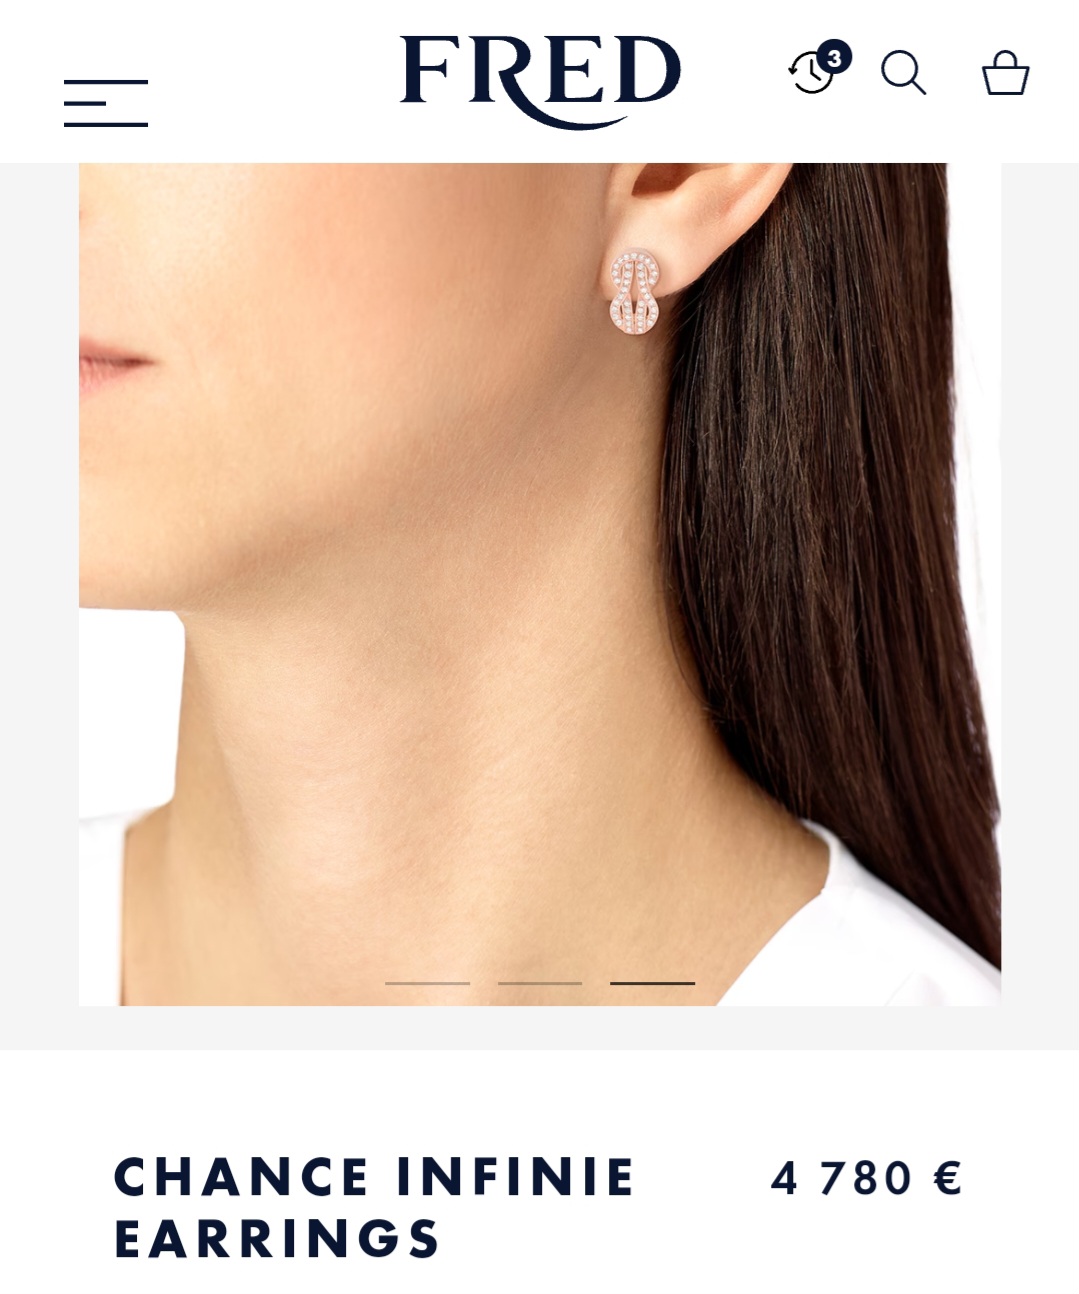 Fred Chance Infinie earrings